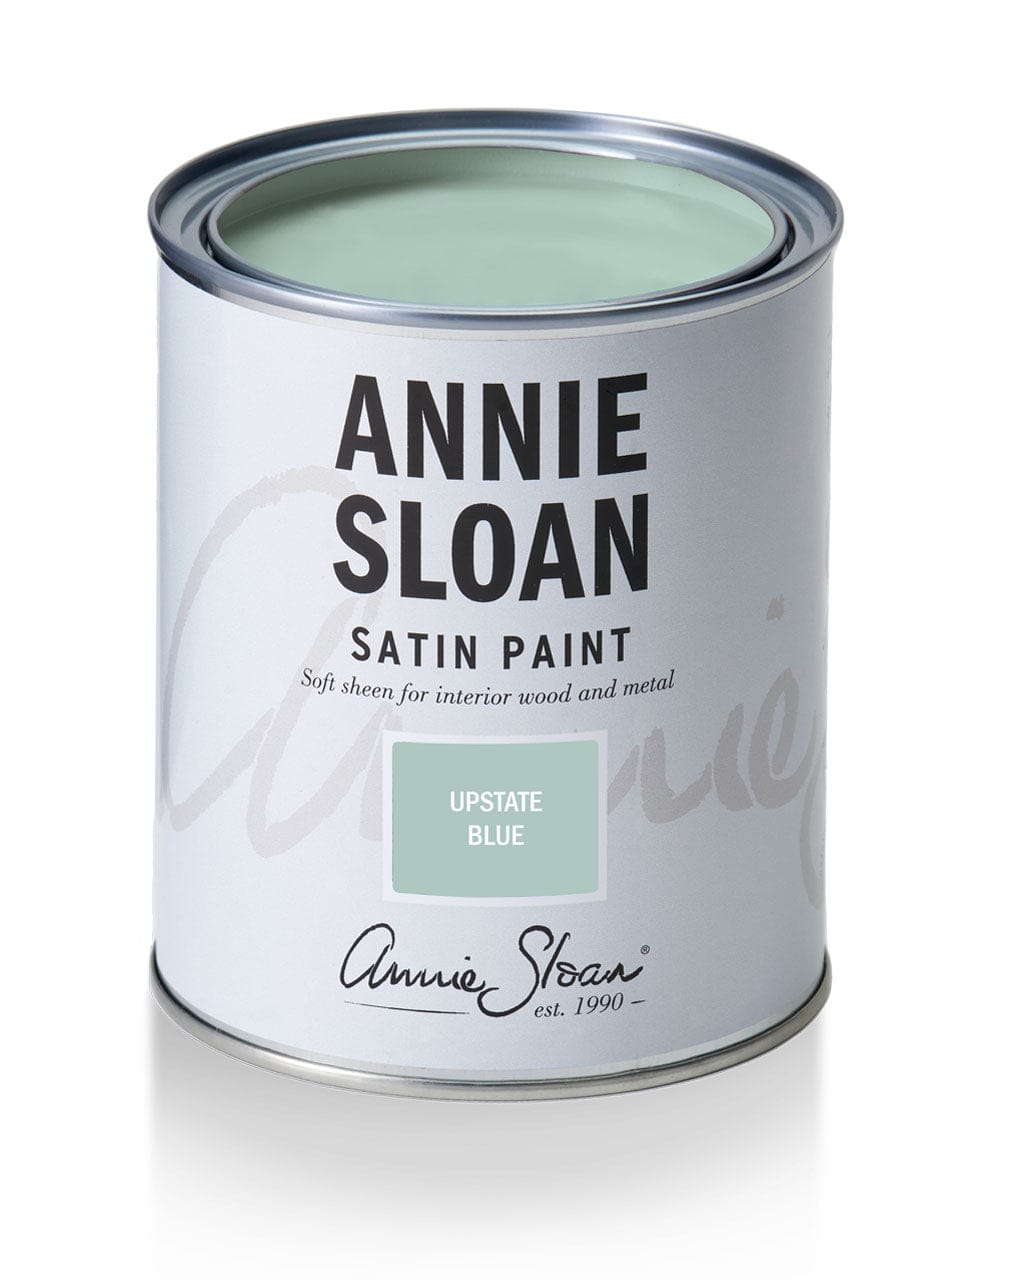 Annie Sloan Satin Paint Upstate Blue - 750 ml - Five and Divine